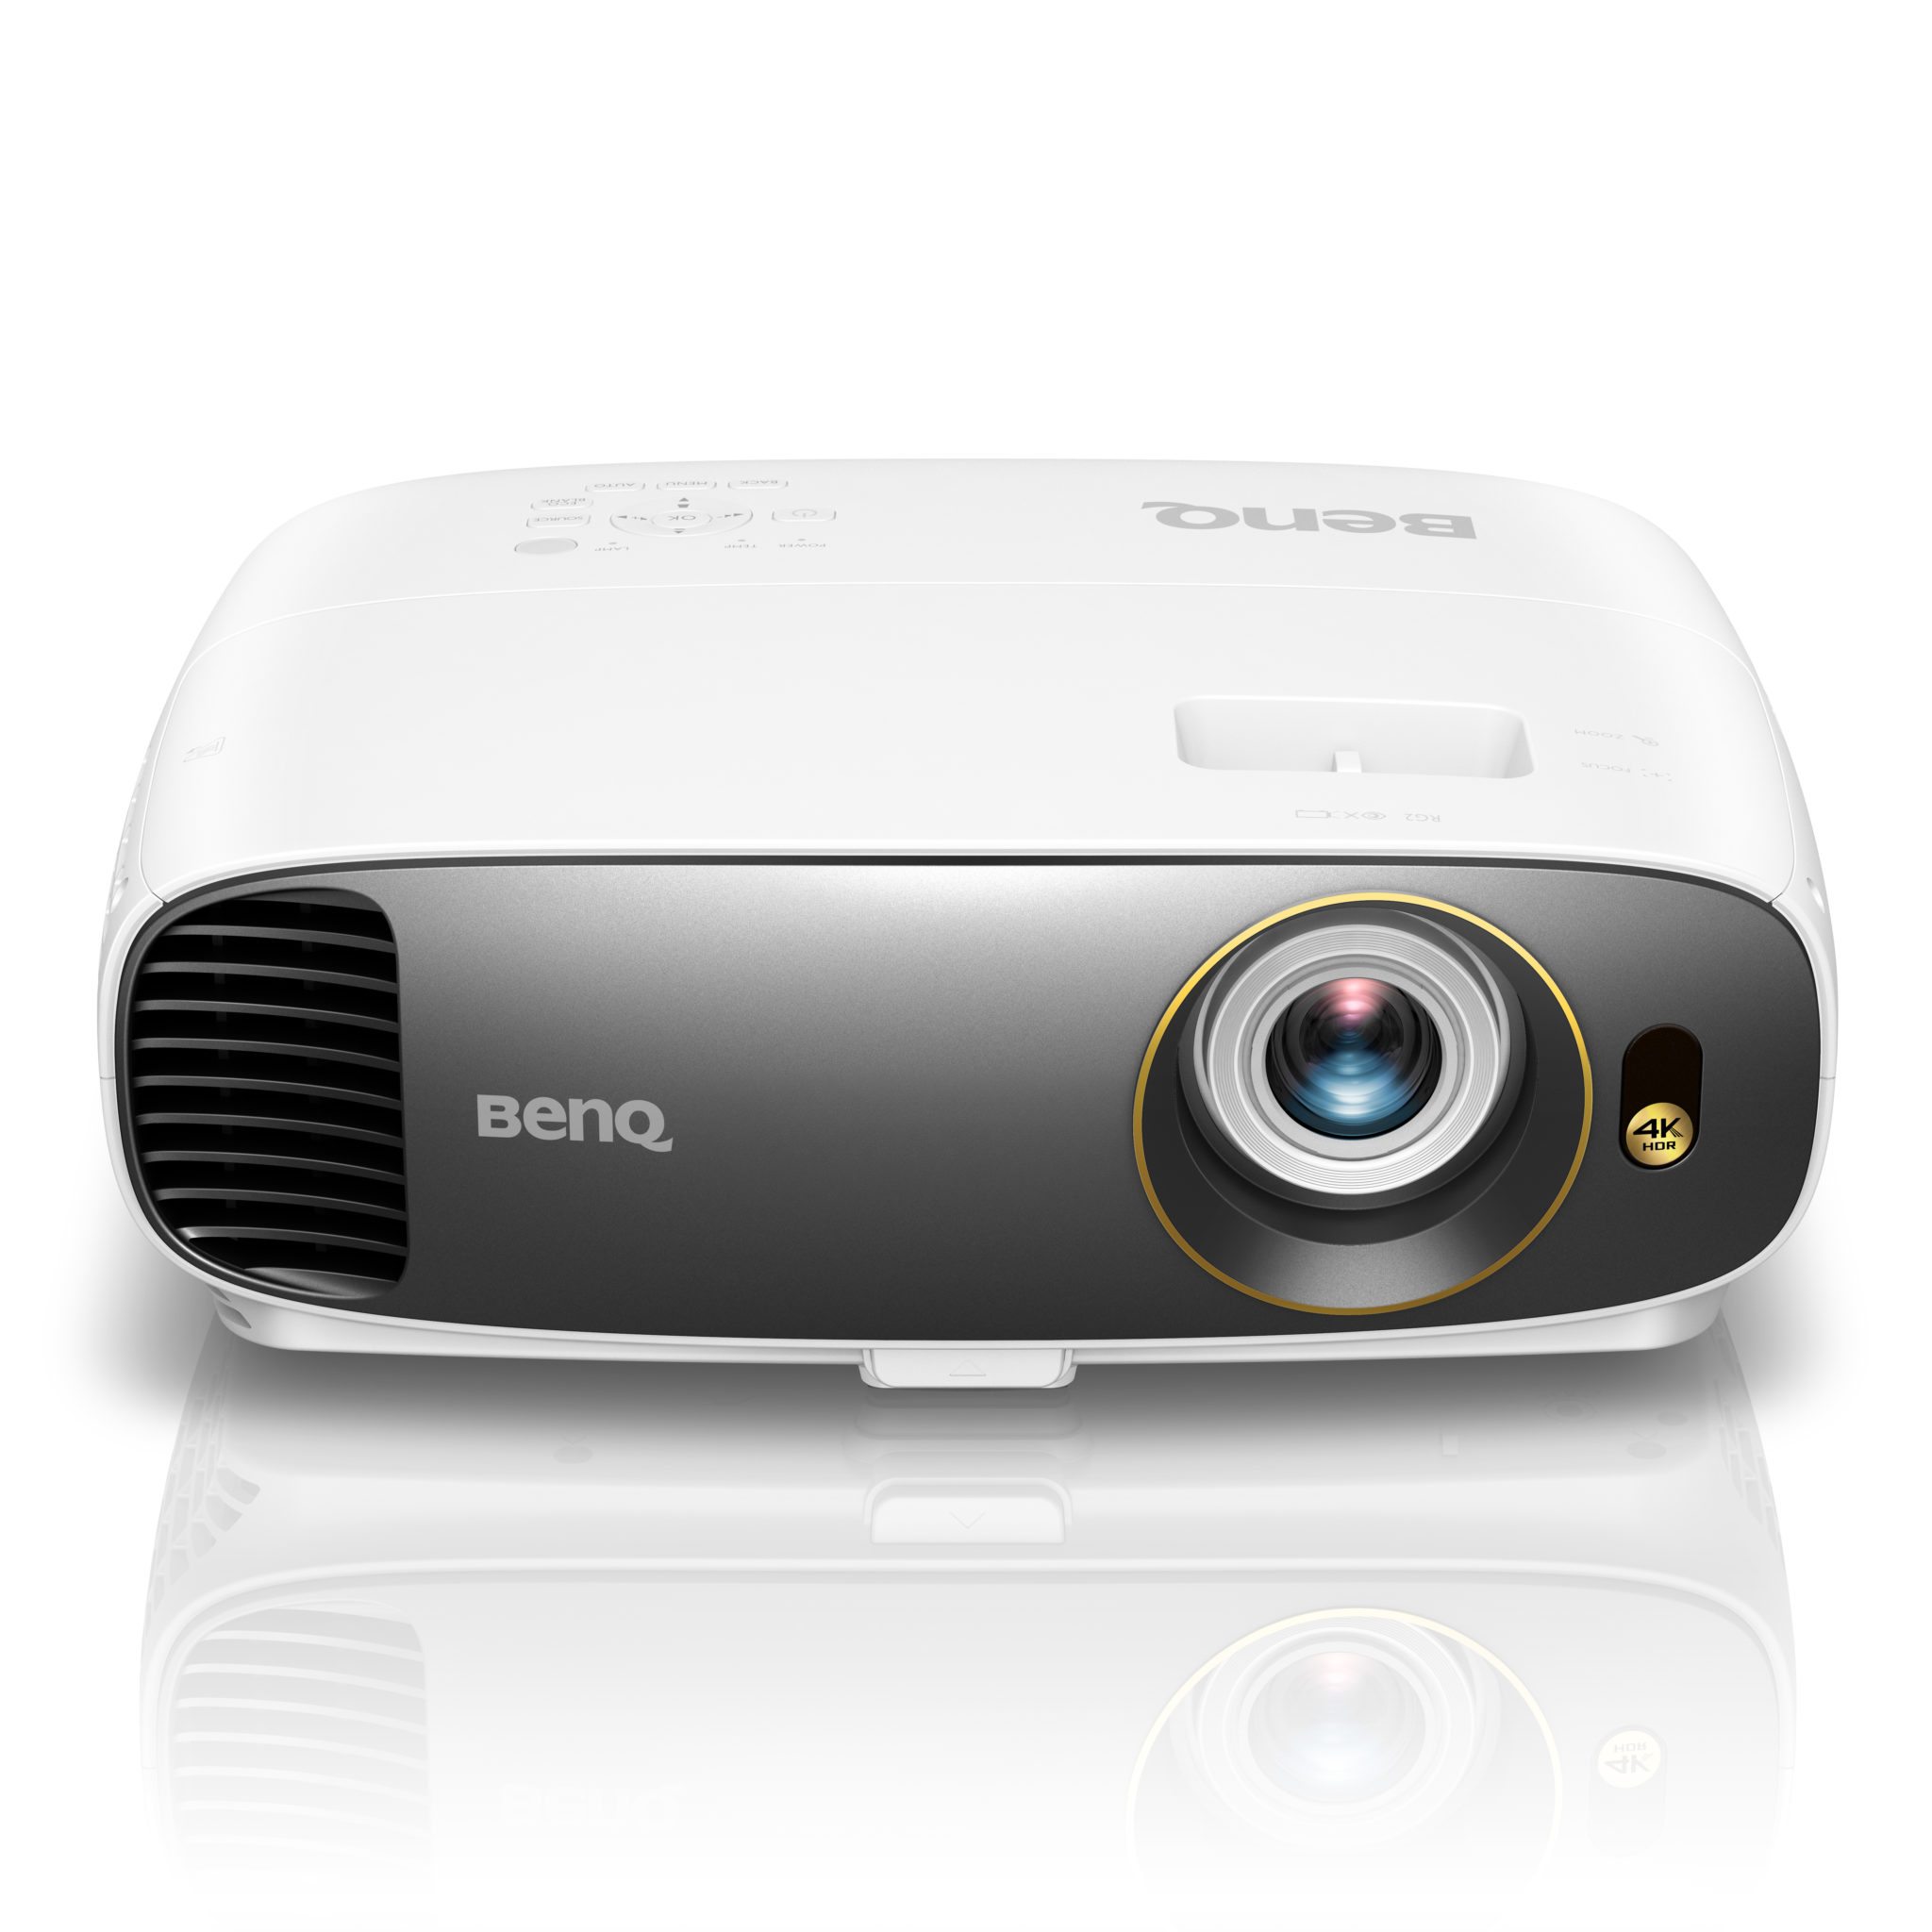 BenQ HT2550 - At $1499, The Most Affordable 4K UHD Projector Yet